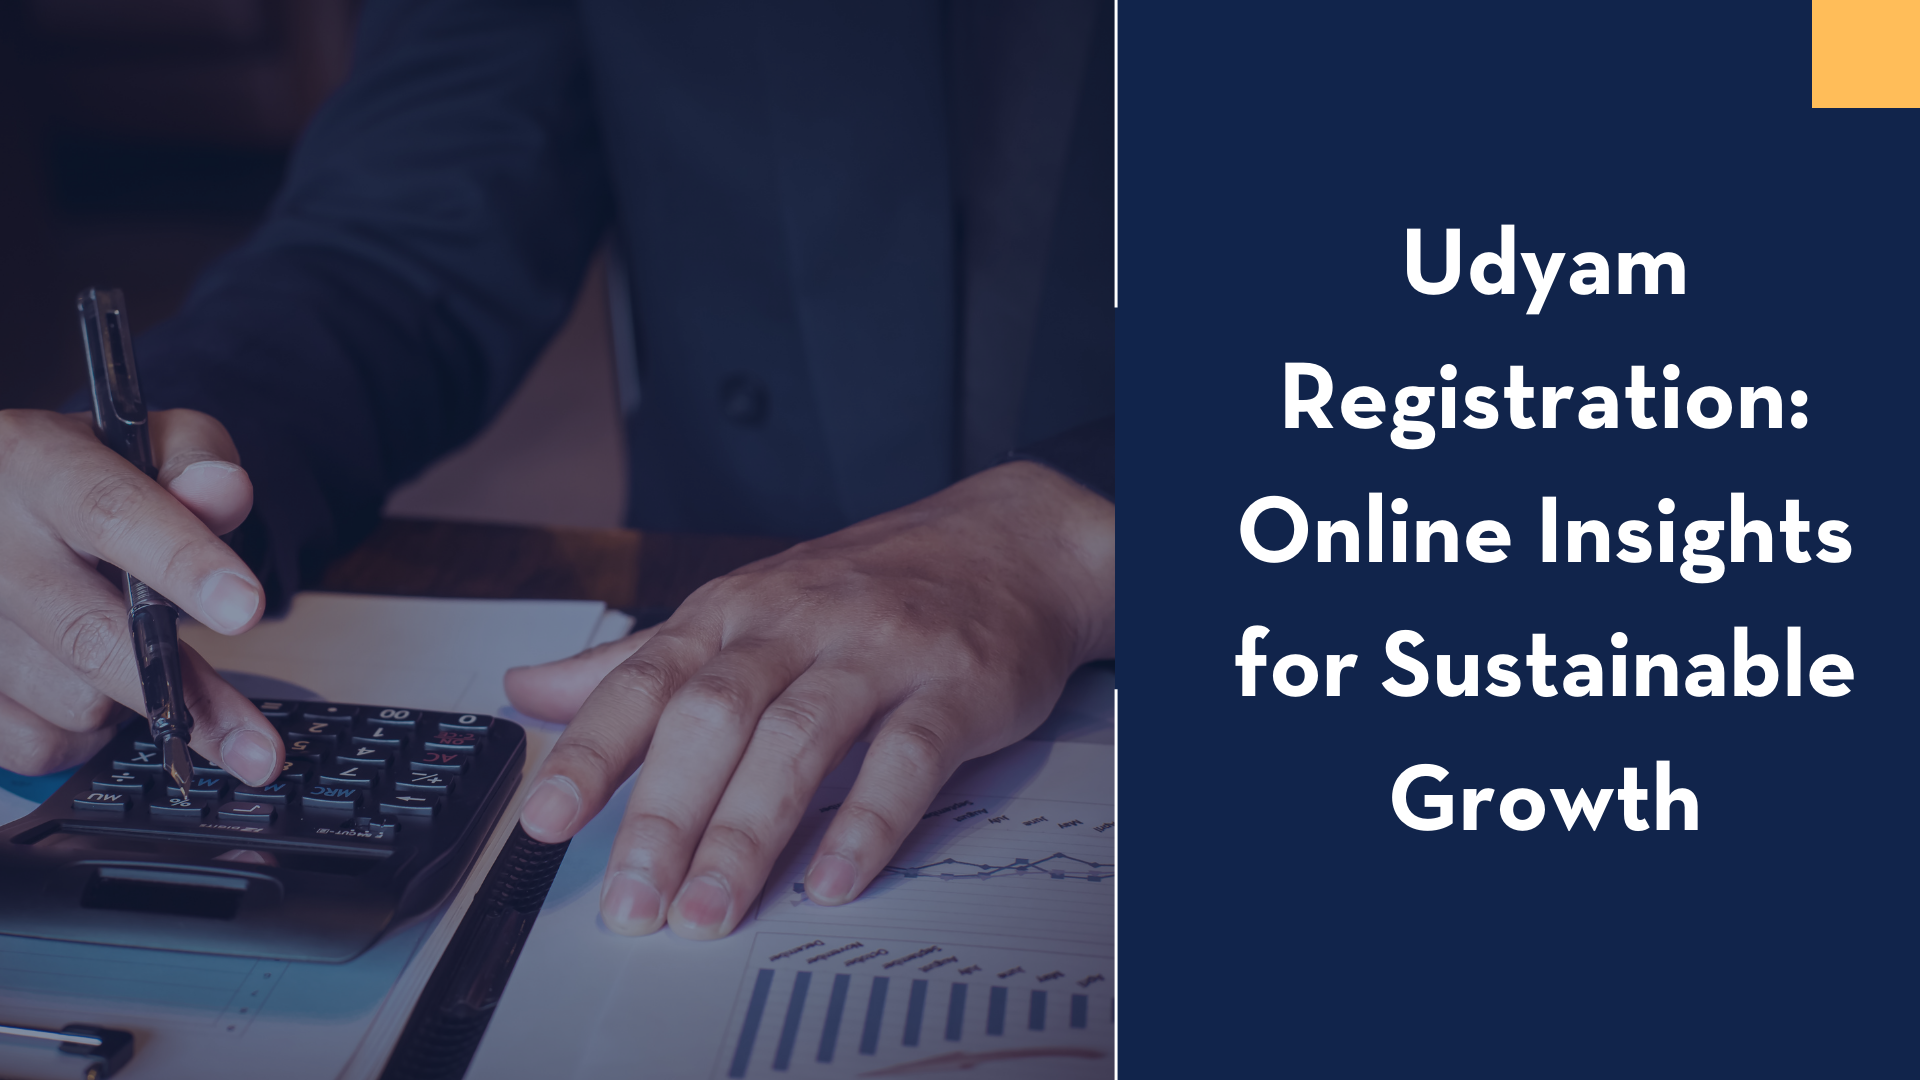 Udyam Registration: Online Insights for Sustainable Growth